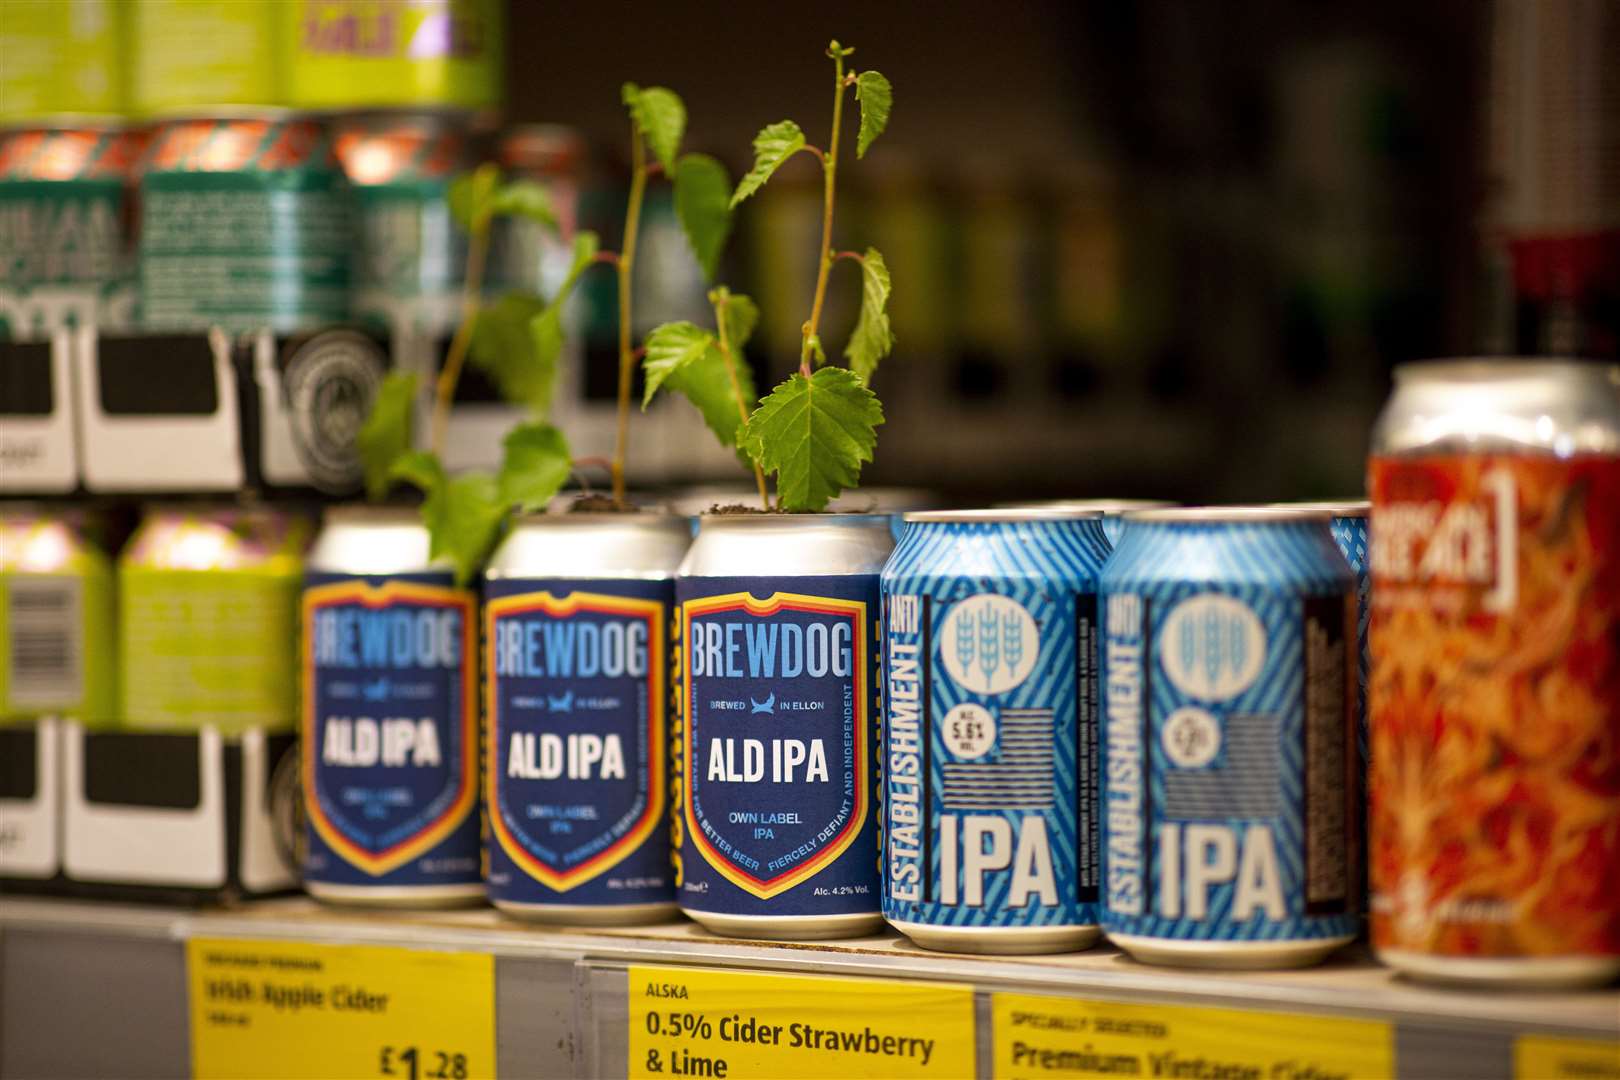 Brewdog and Aldi have collaborated on new beer ALD IPA.